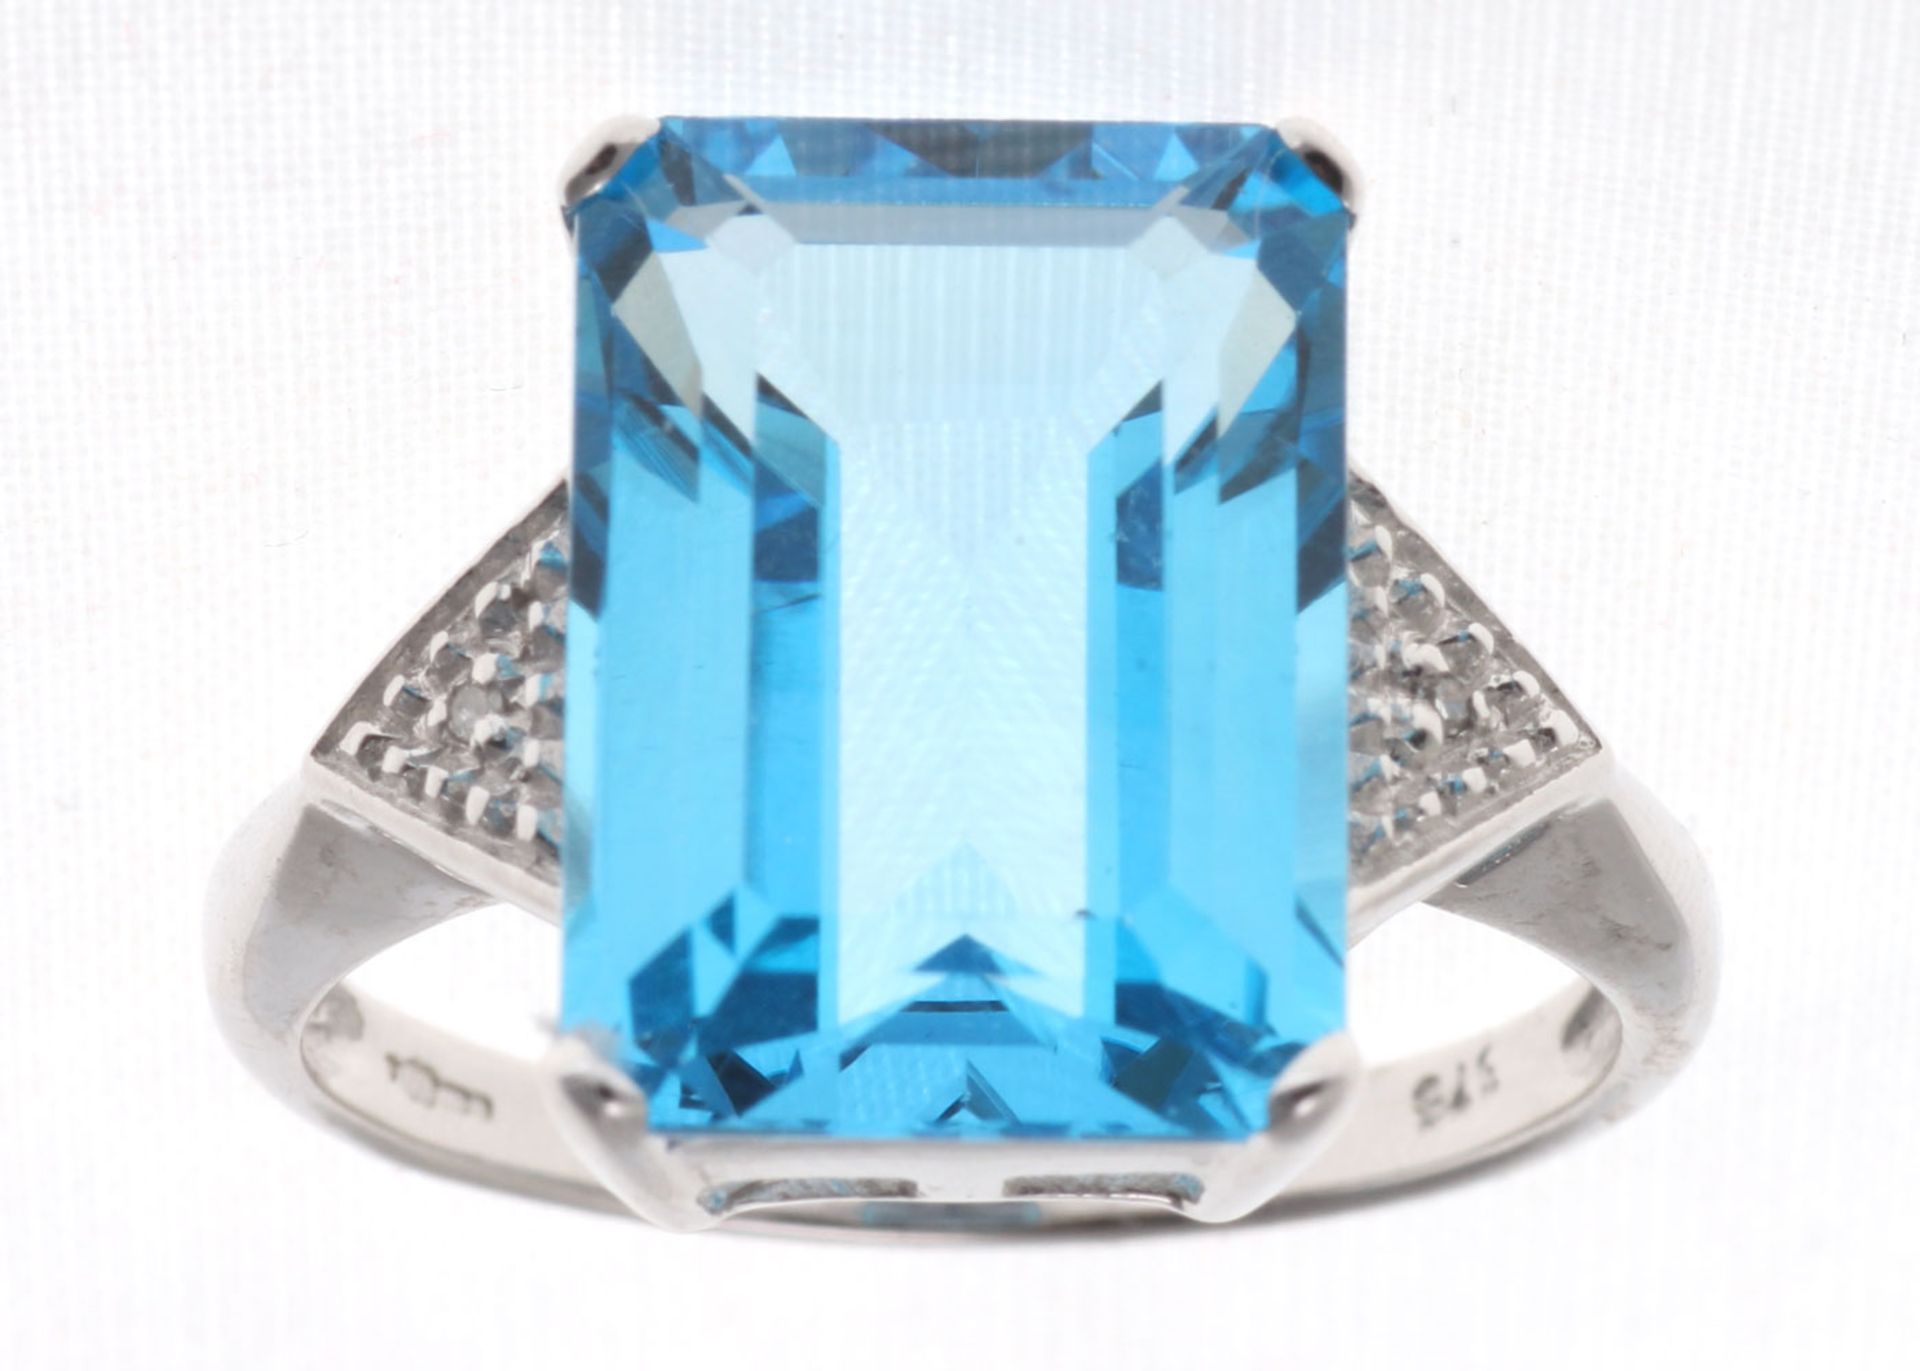 9ct White Gold Diamond And Blue Topaz Ring 0.01 Carats - Image 6 of 6